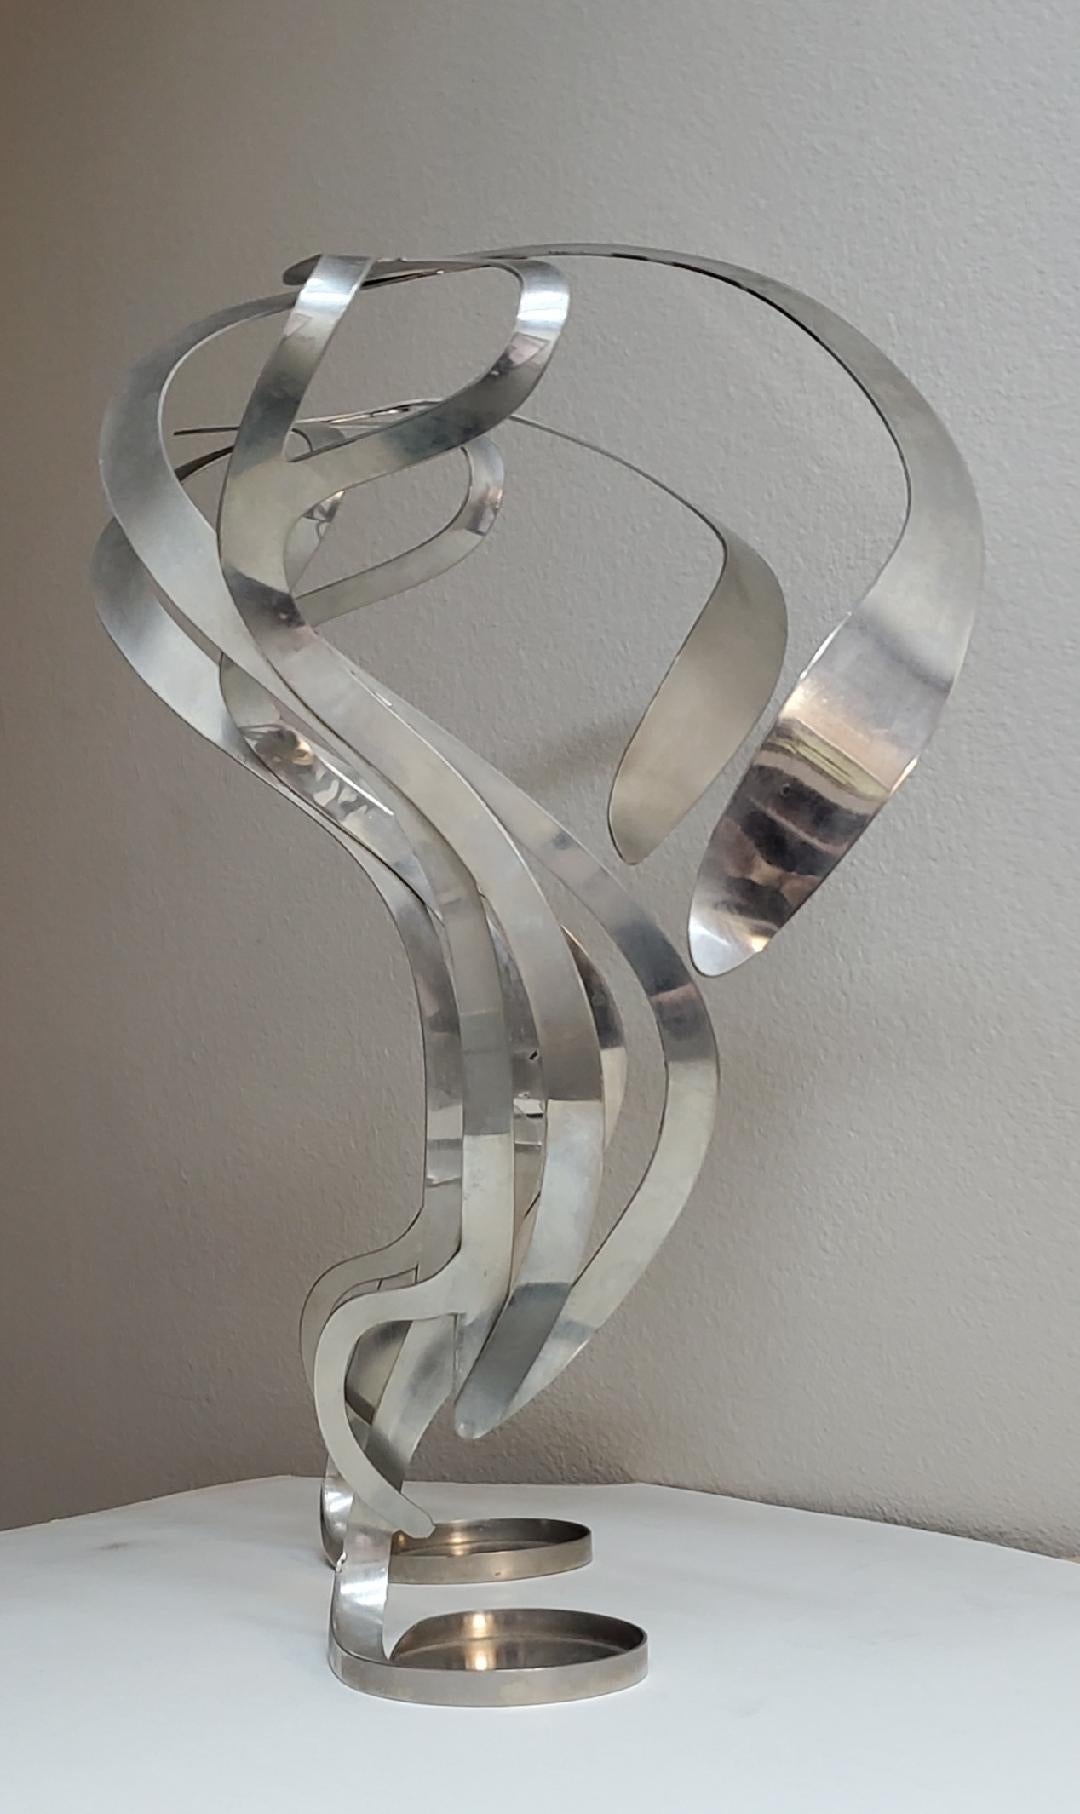 These Are A Pair Art Nouveau Styled Candle Holders Crafted Into Swirling Twirling Metal Smoke.
This Is A Beautiful Set Of Stainless Steel Candle Holders Which Alludes To The Motion Of Spiraling Smoke That Drifts Lazily Upward.
The Dimensions Are 21